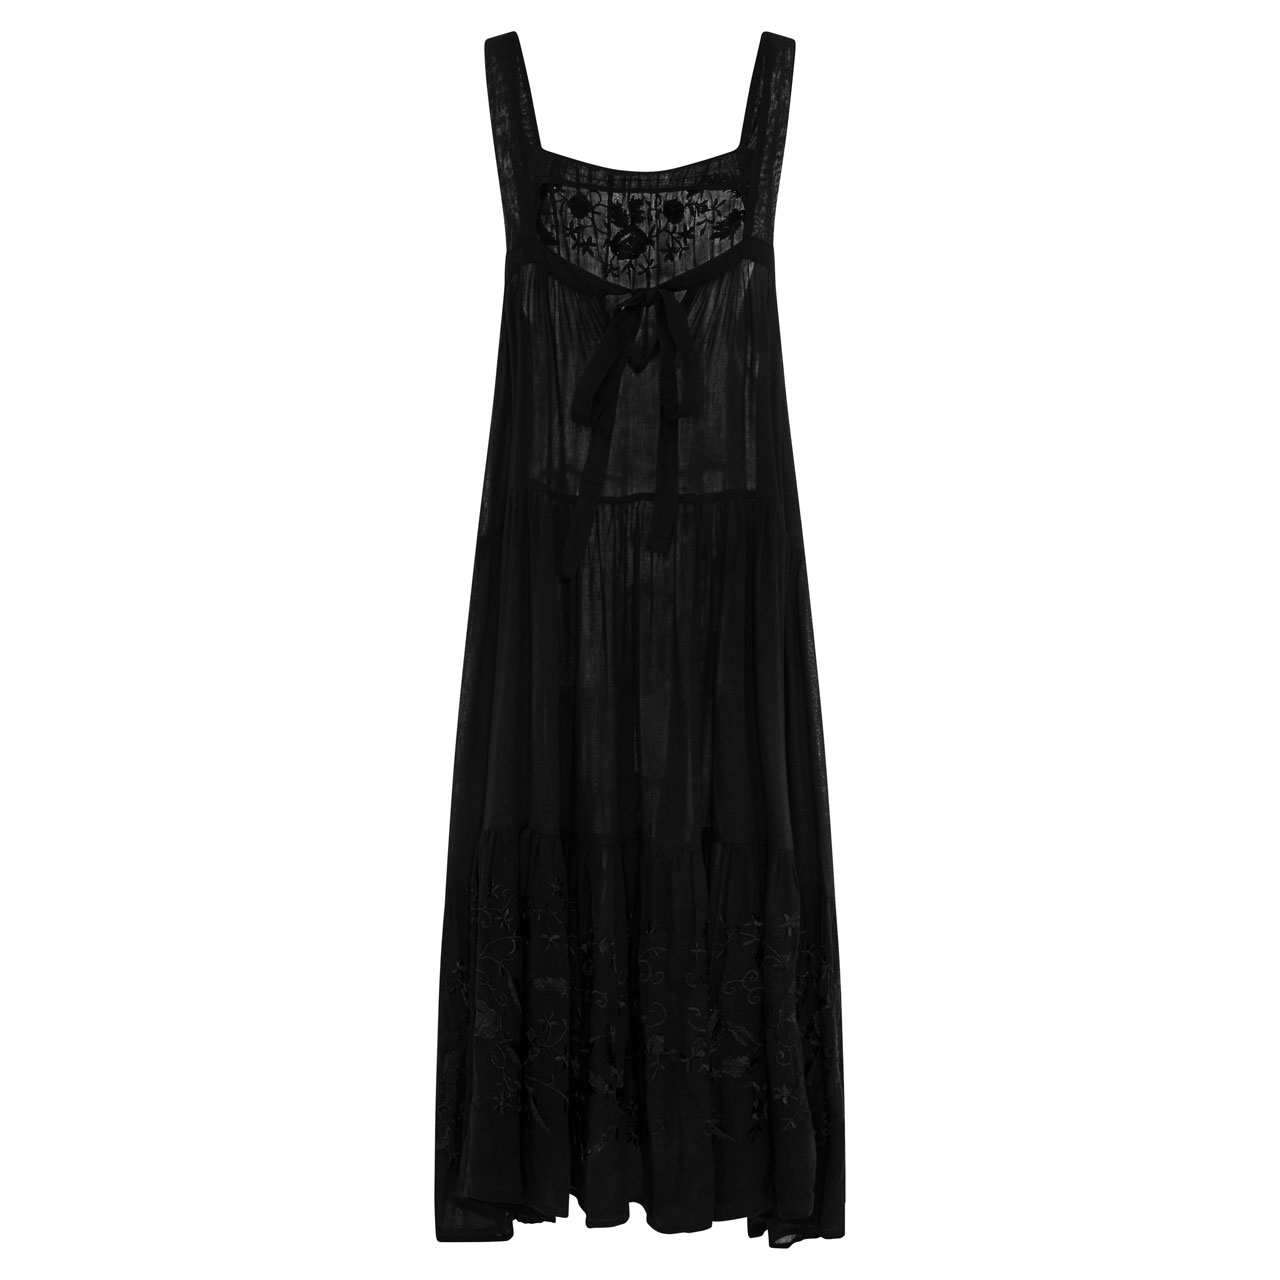 Dahlia Dress By All That Remains - Nakawe Trading